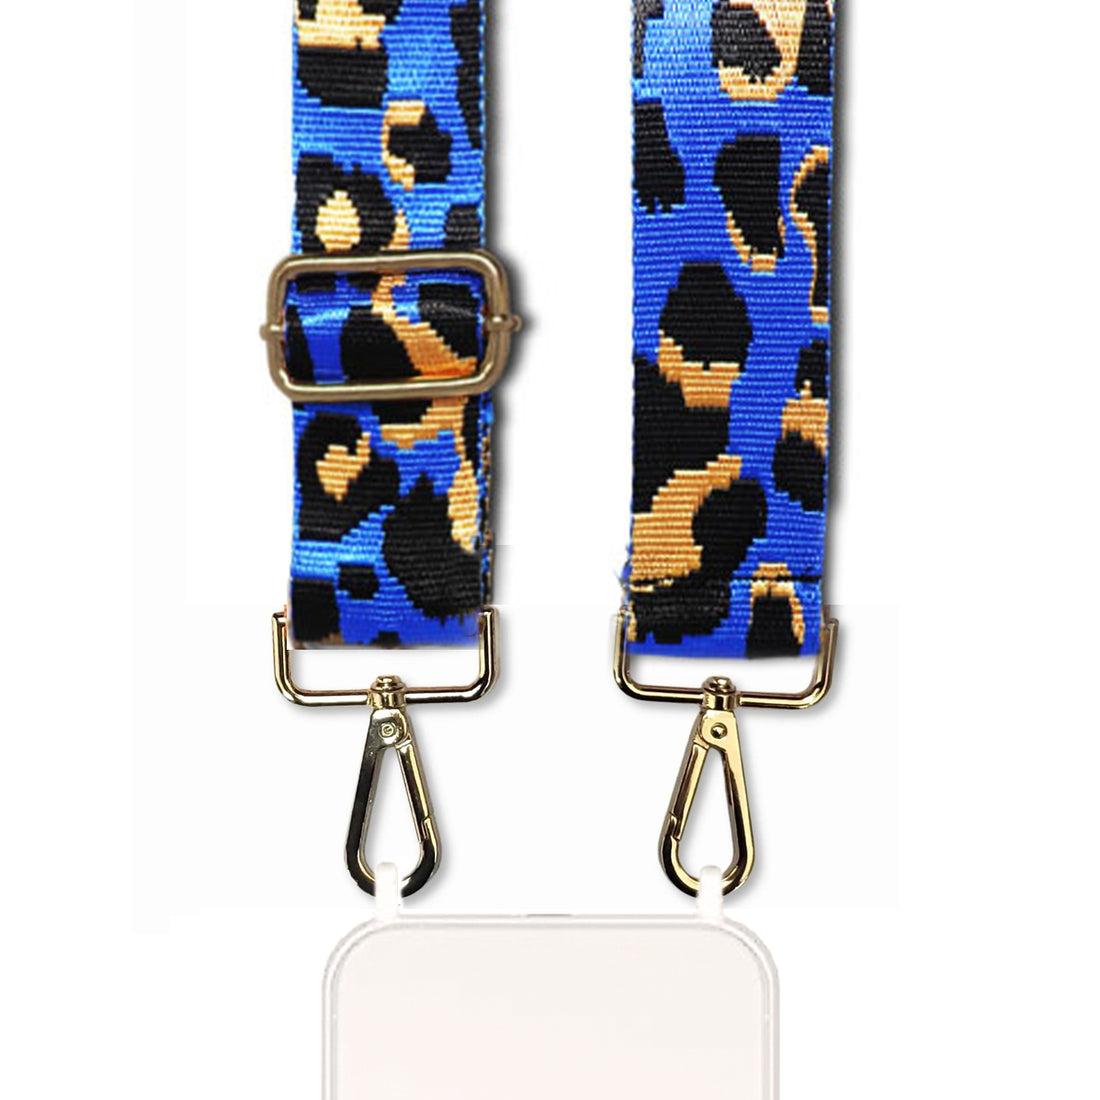 Zahara - Leopard Print Adjustable Strap with Golden Carabiners